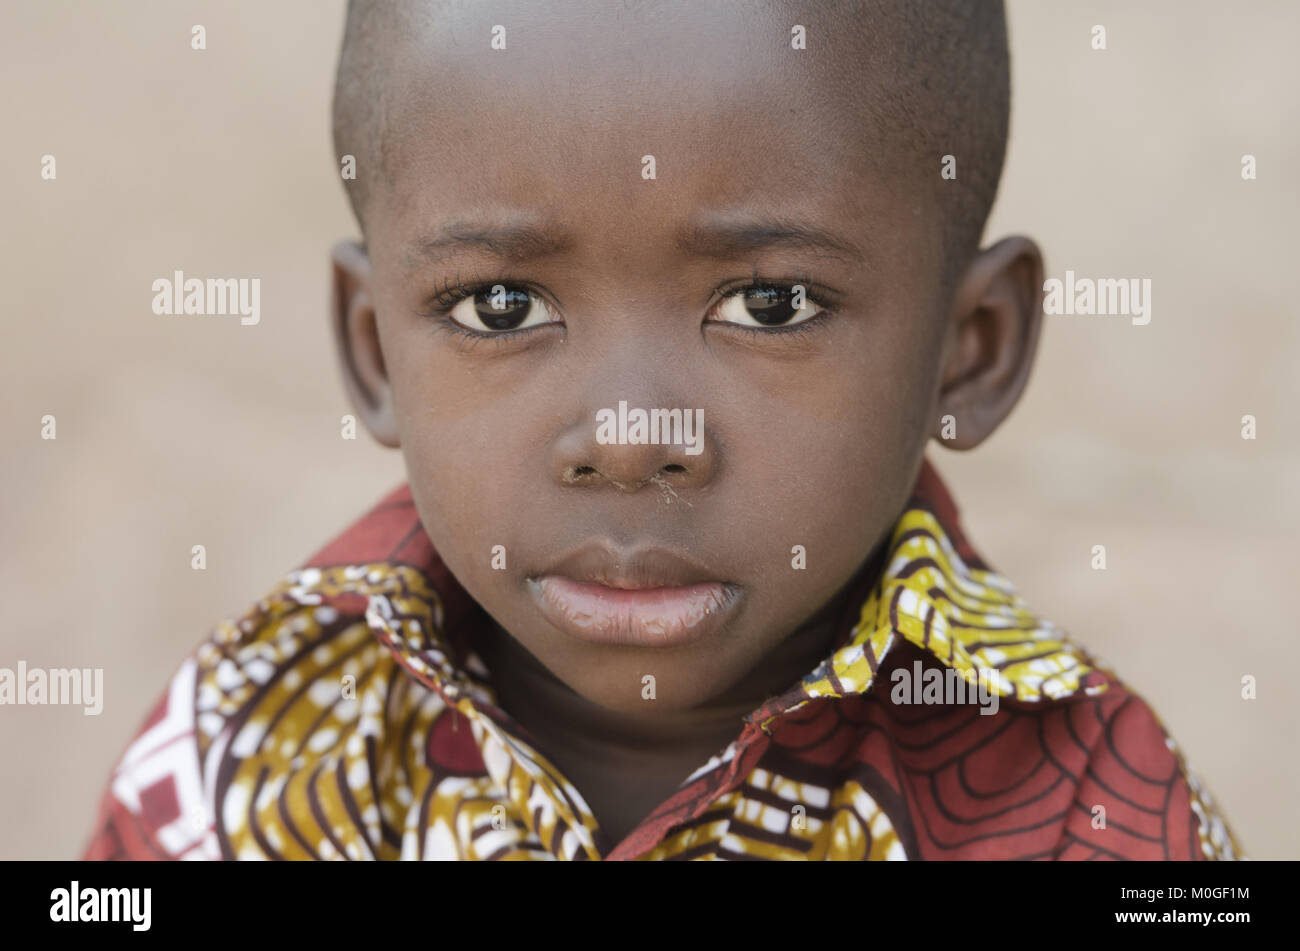 Little African Black Boy Looking Sad at Camera Stock Photo